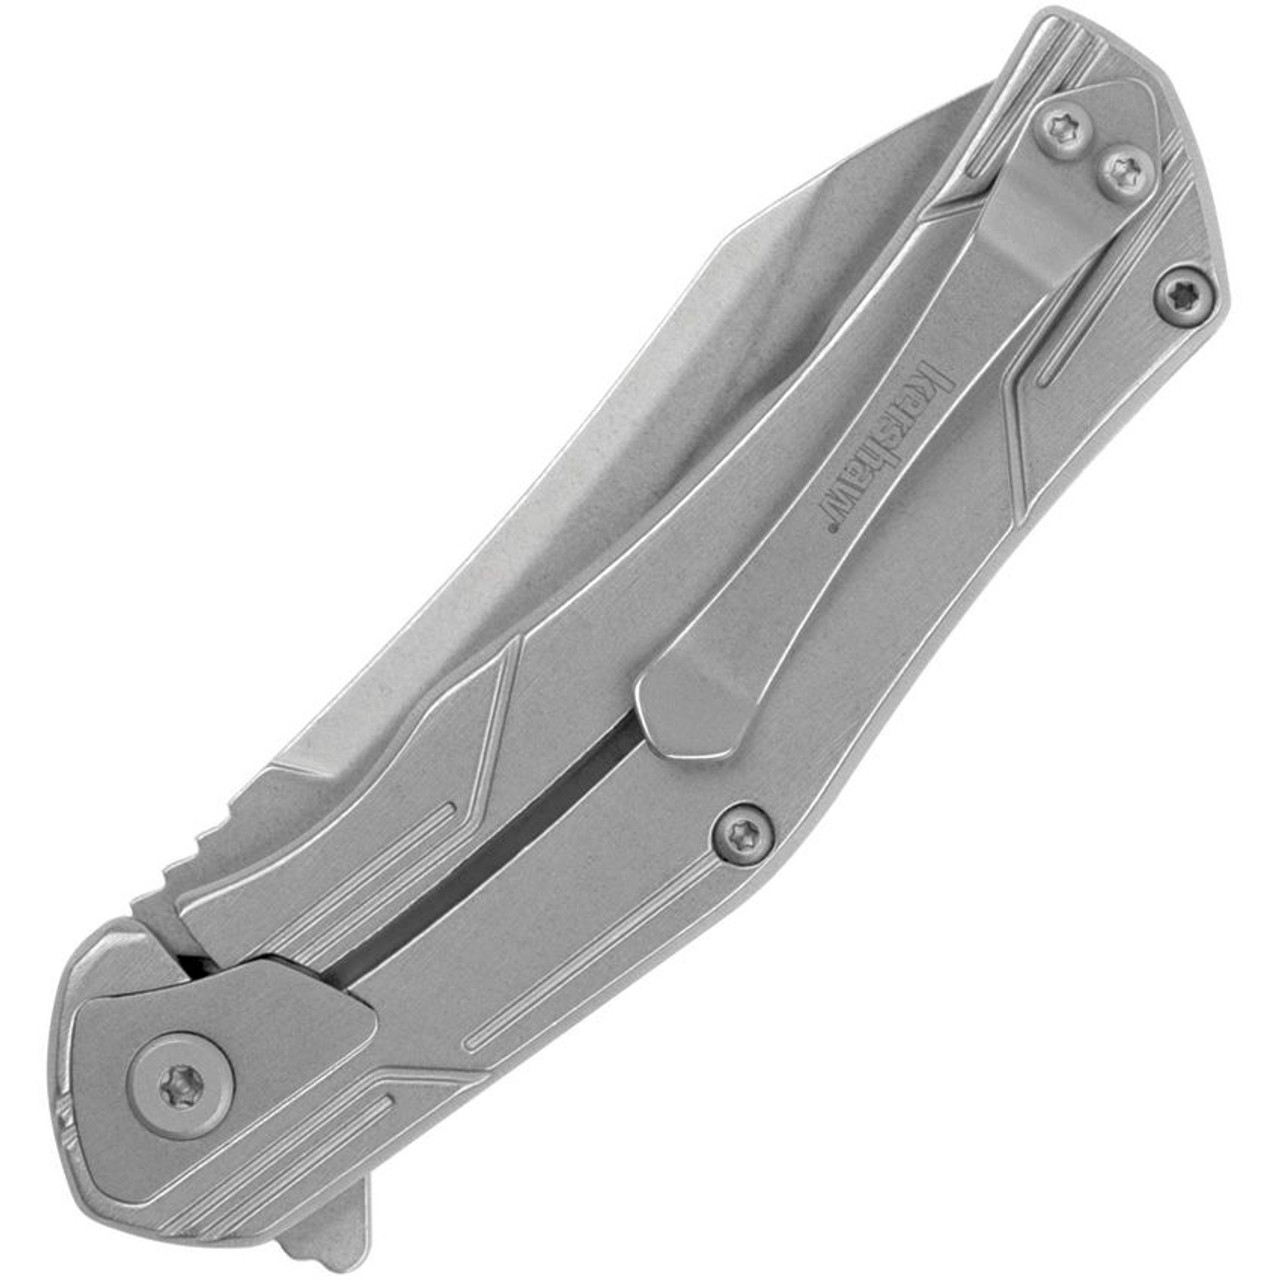 Kershaw Husker Assisted Opening Knife (1380)- 3.00" Stonewashed 8Cr13MoV Trailing Point Blade, Silver Stainless Steel Handle